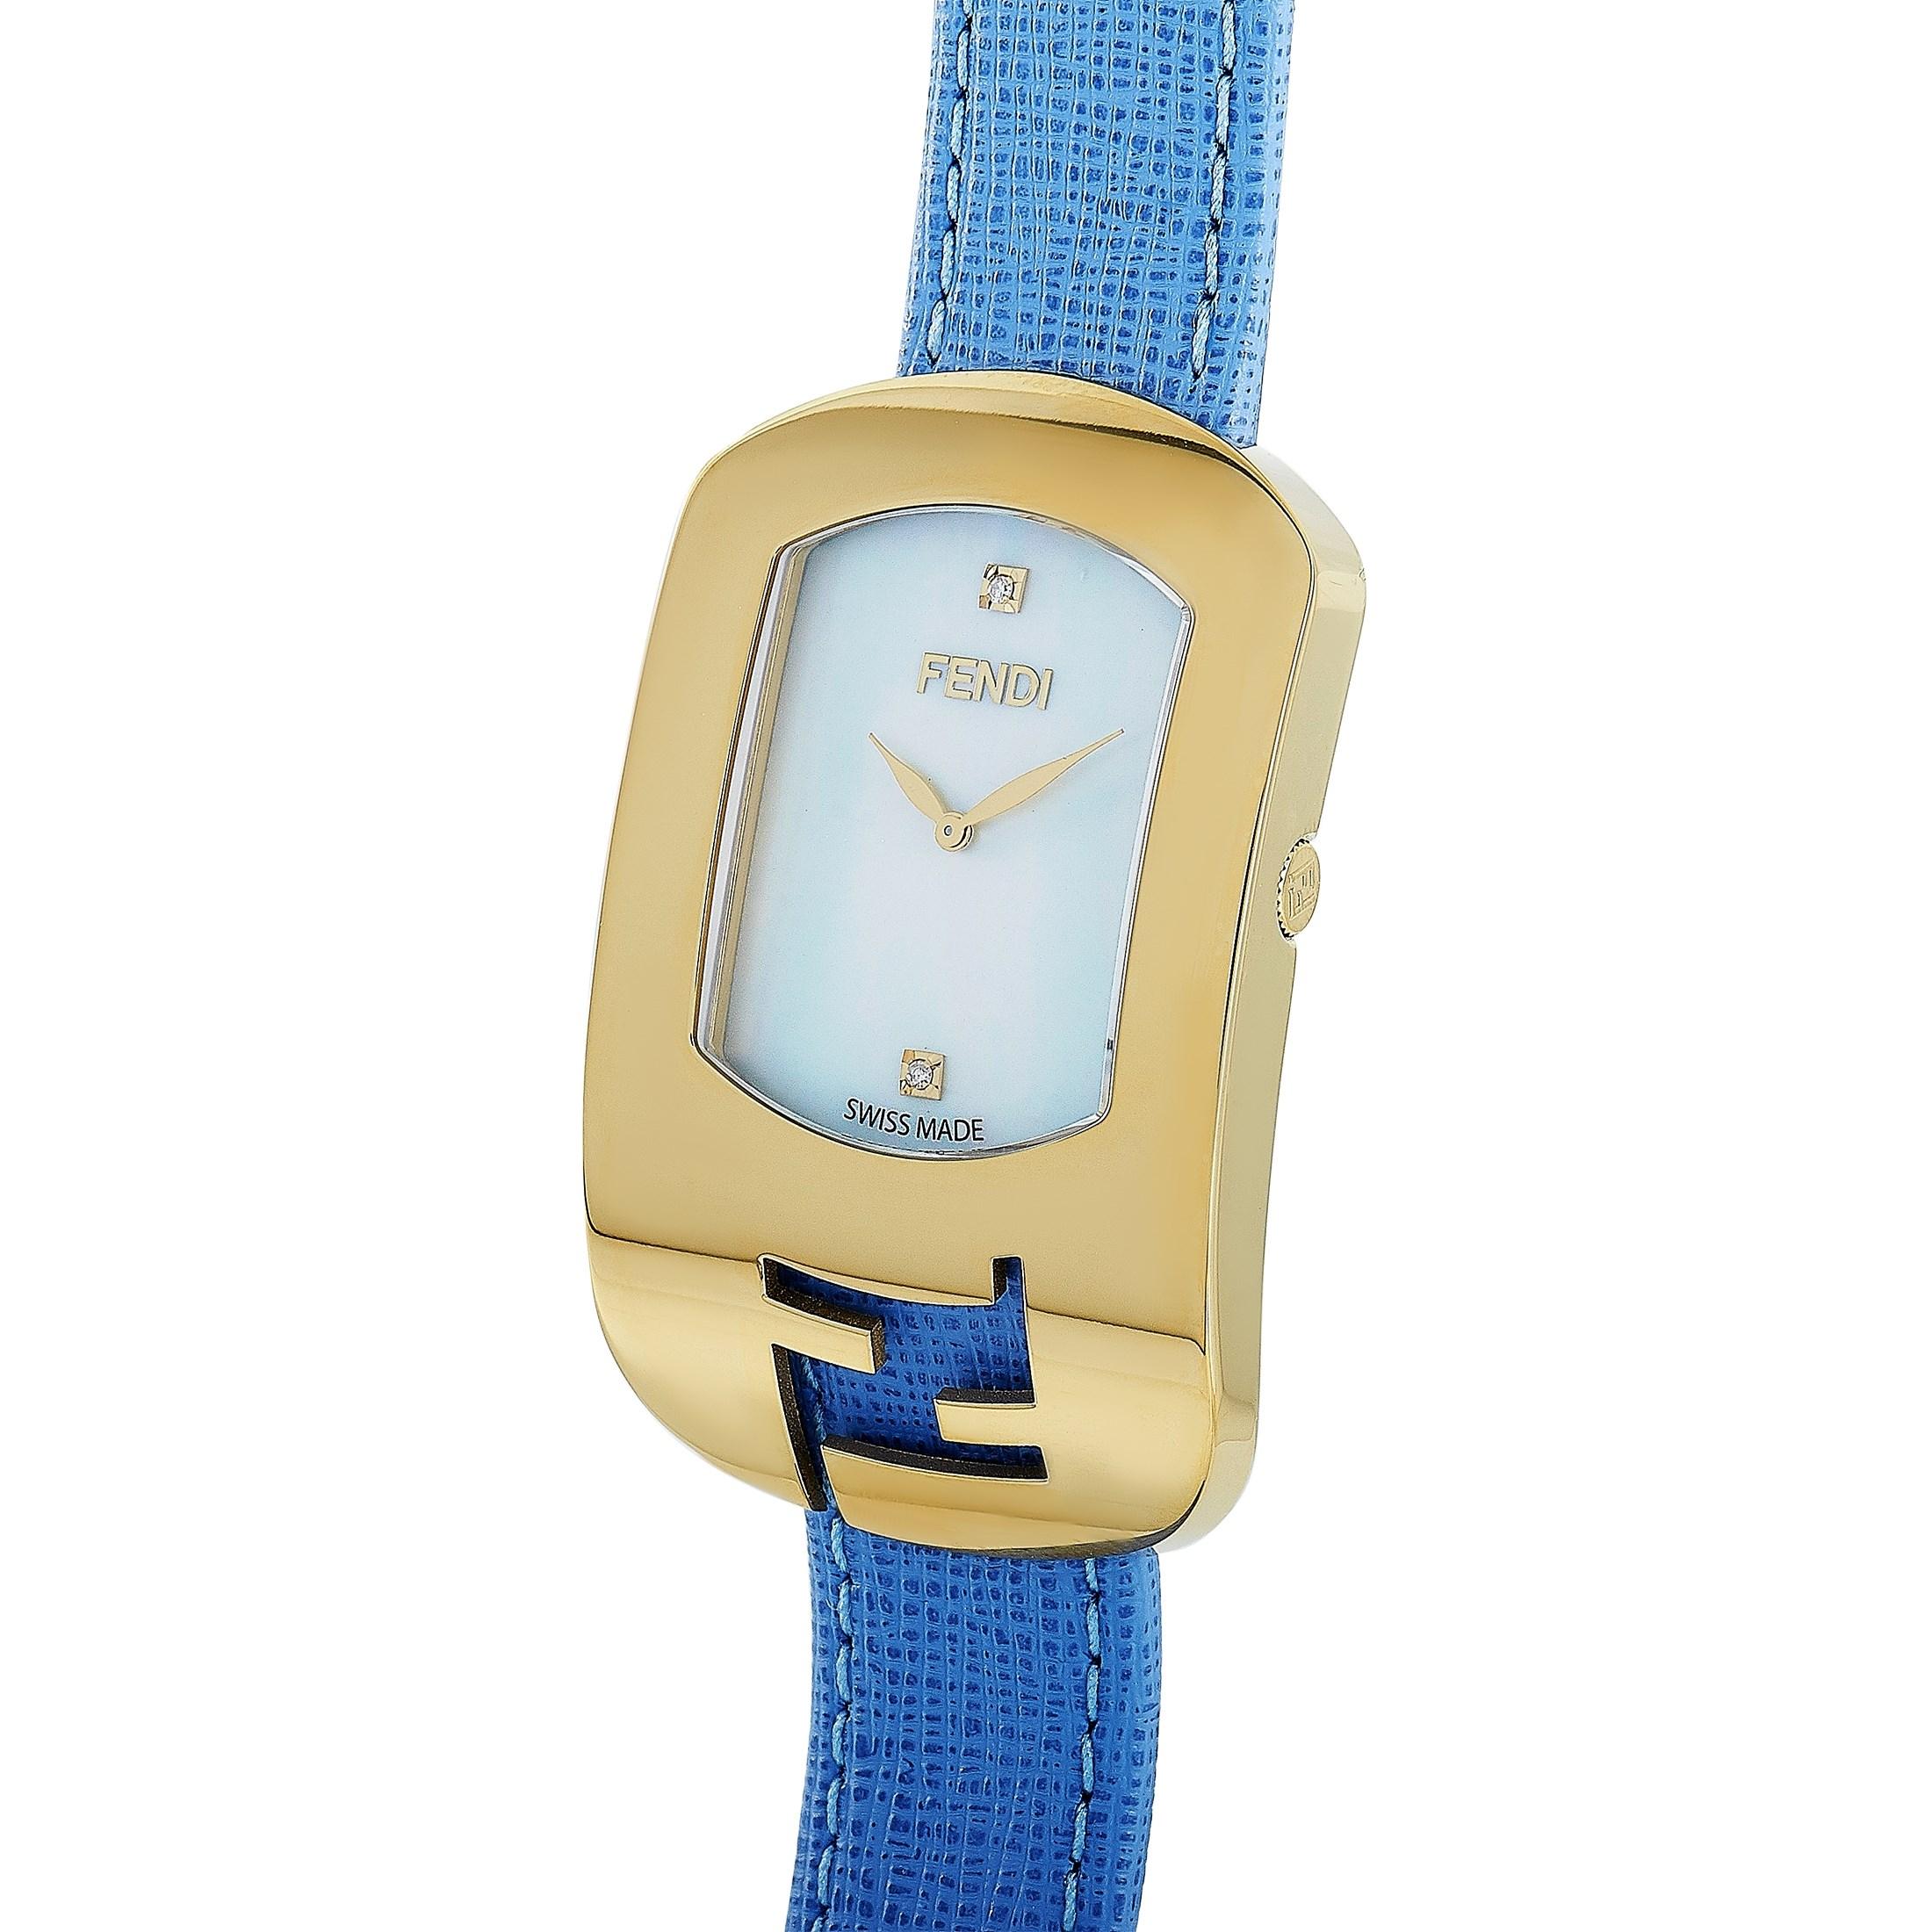 This is the Fendi Chameleon watch, reference number F300434532D1.

It is presented with a gold-tone stainless steel case that offers water resistance of 30 meters. The watch is worn on a blue leather strap fitted with a tang buckle. The mother of